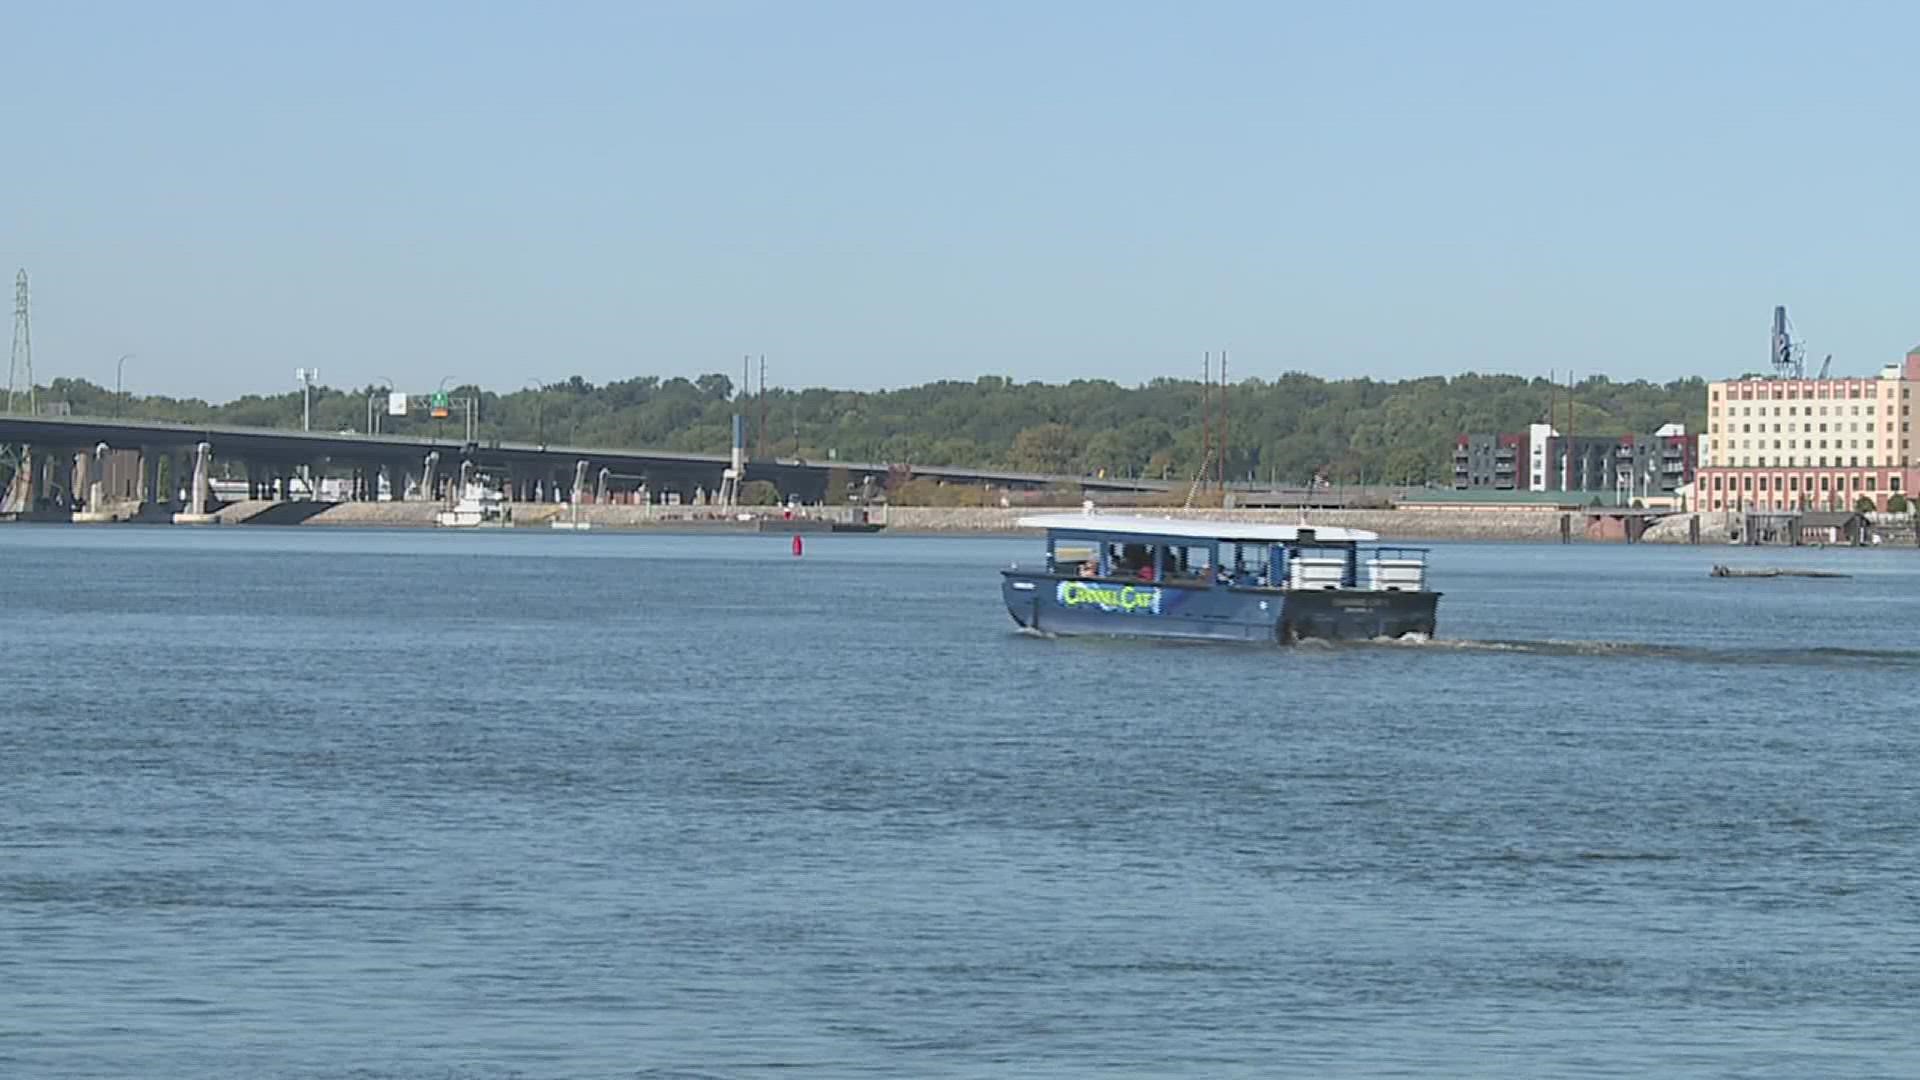 Sunday marked the last day of the water taxi season, and service is expected to resume next Memorial Day weekend.